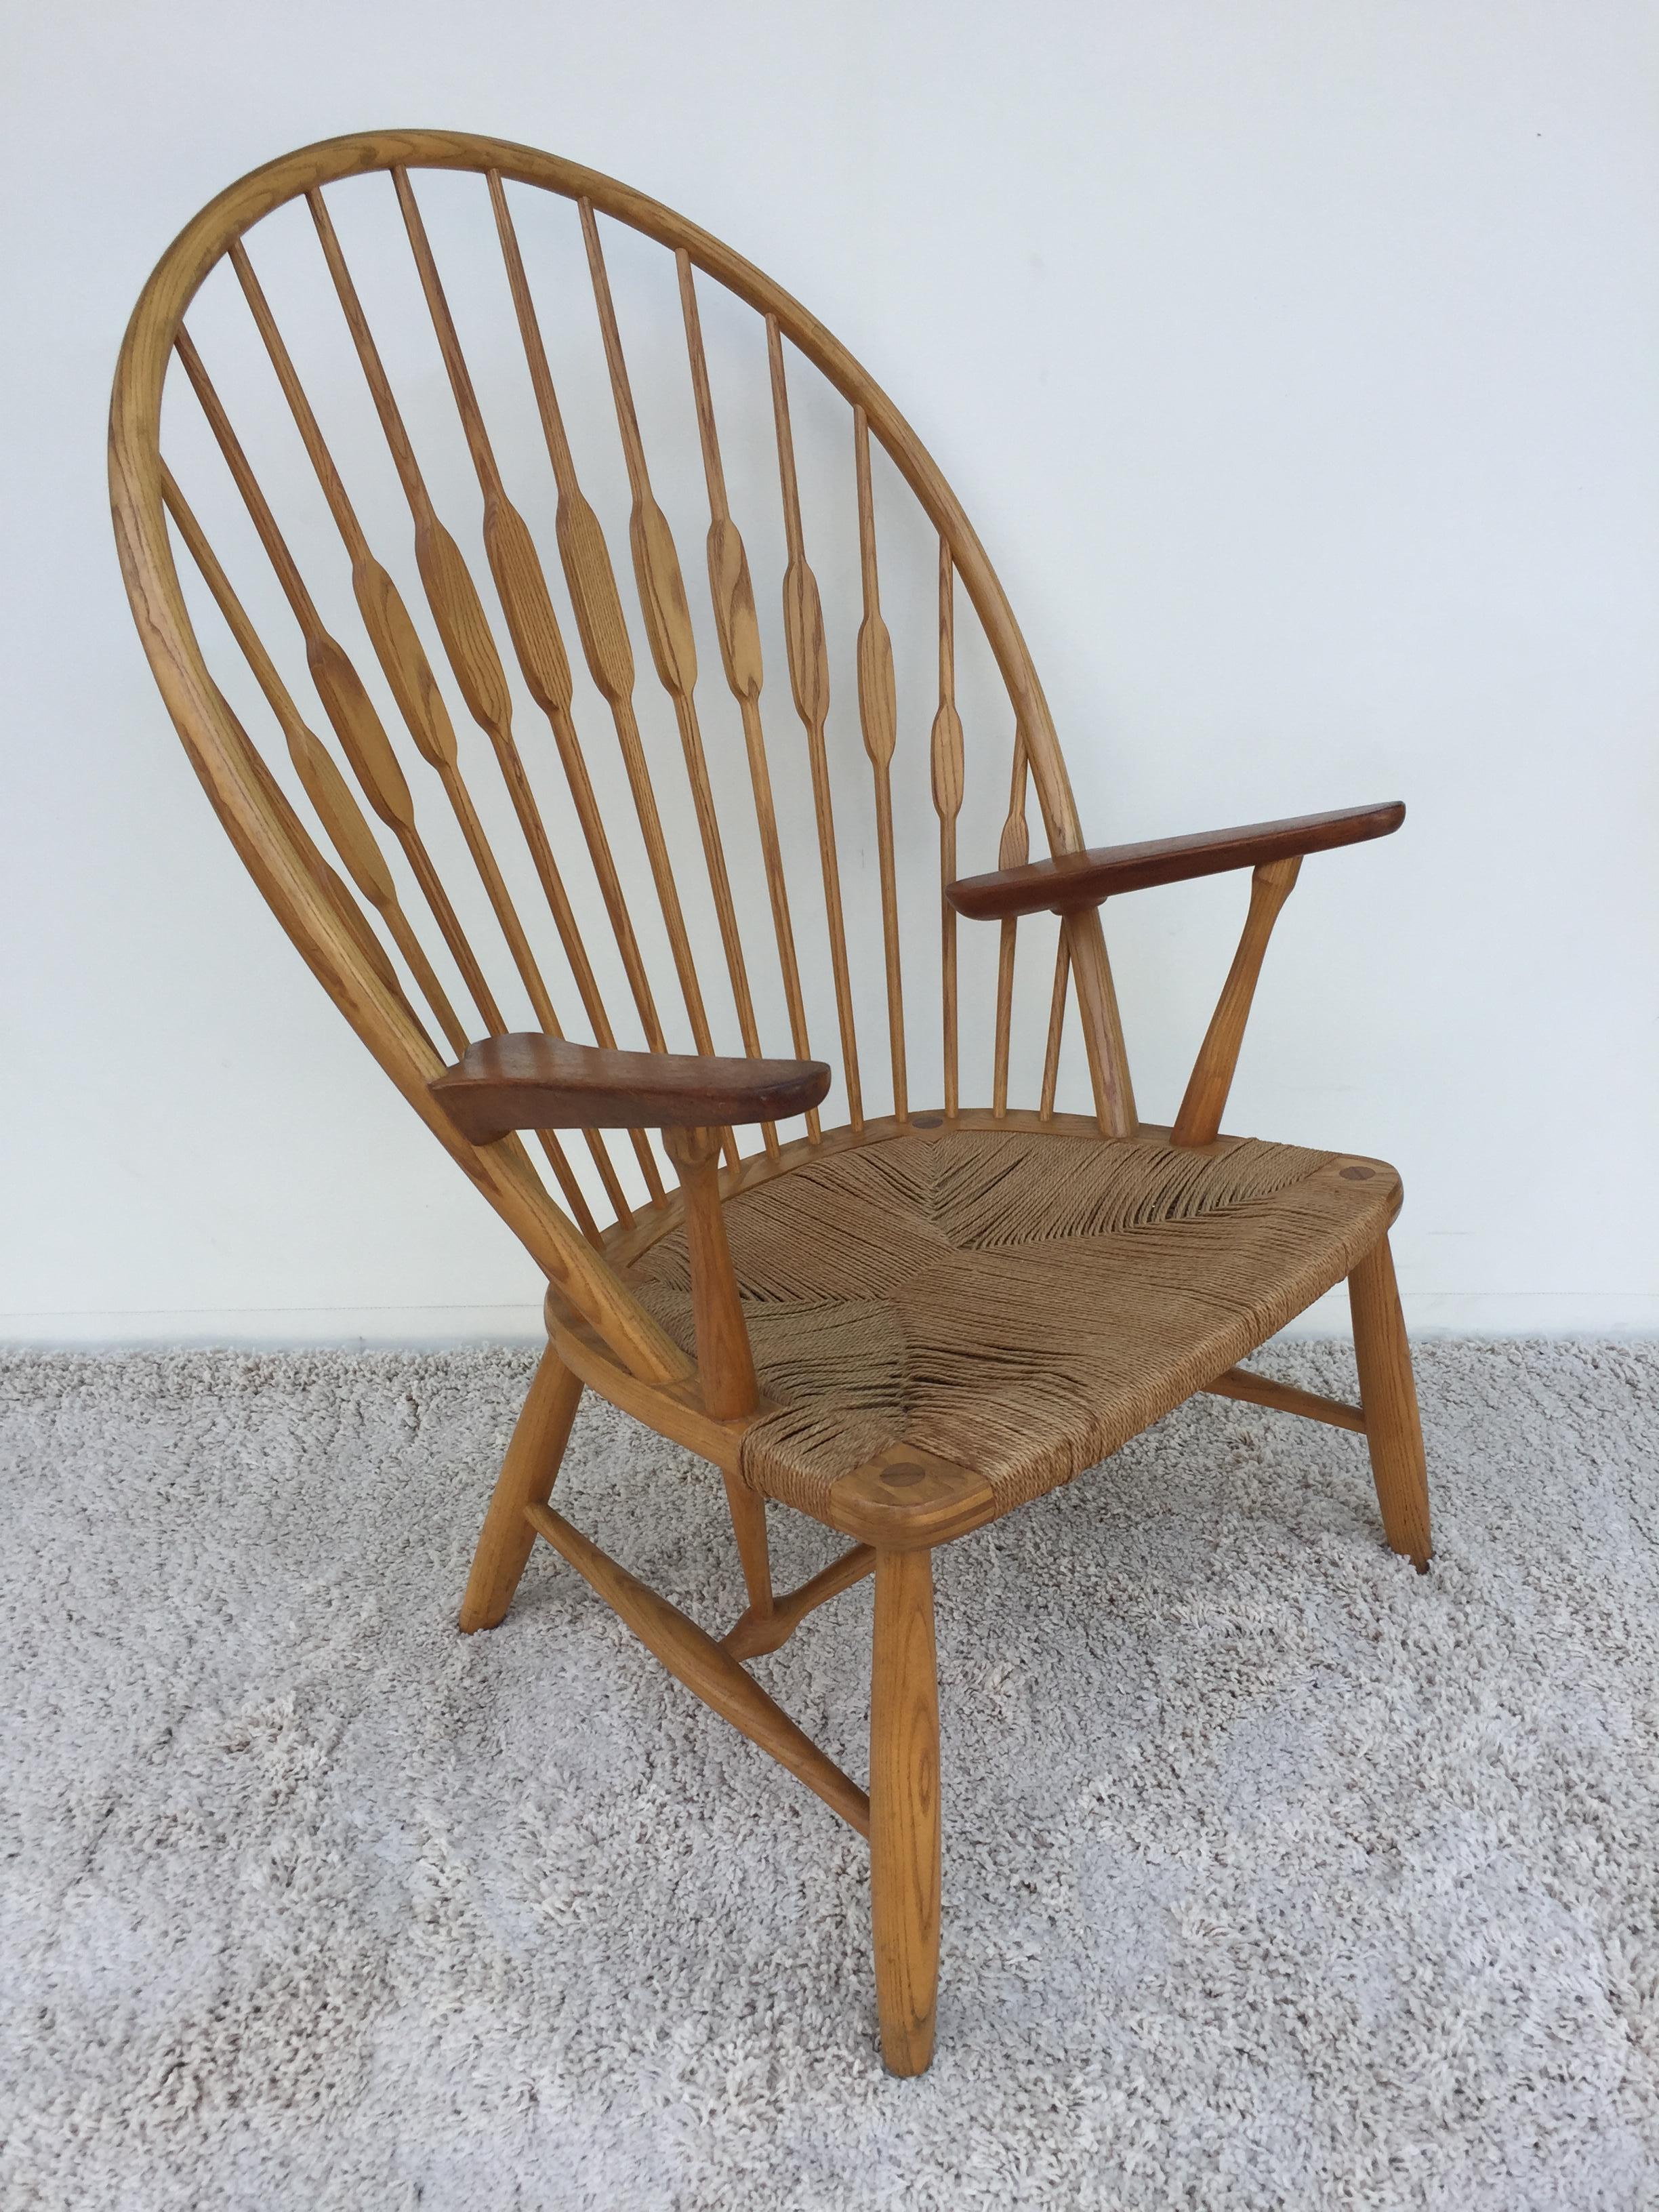 Hans Wegner light oak peacock chair, with all original rope cane seat, and finish. Stamped branded and paper label under seat. In wonderful condition.